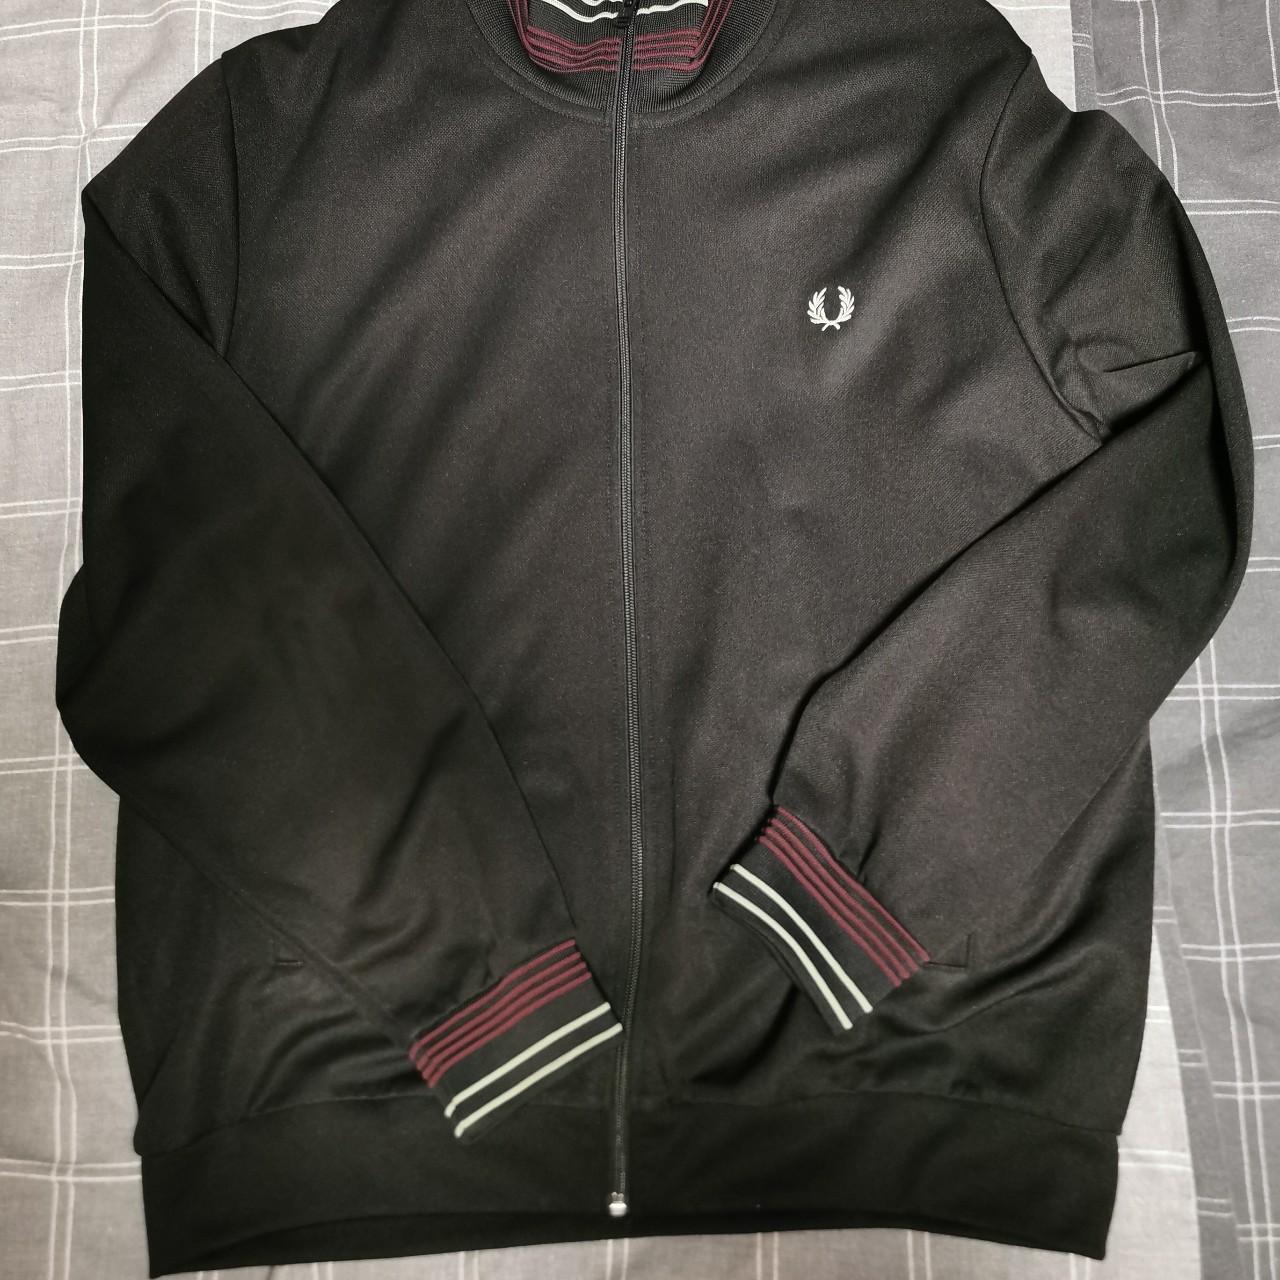 Fred perry tracksuit jacket mens! Great condition,... - Depop